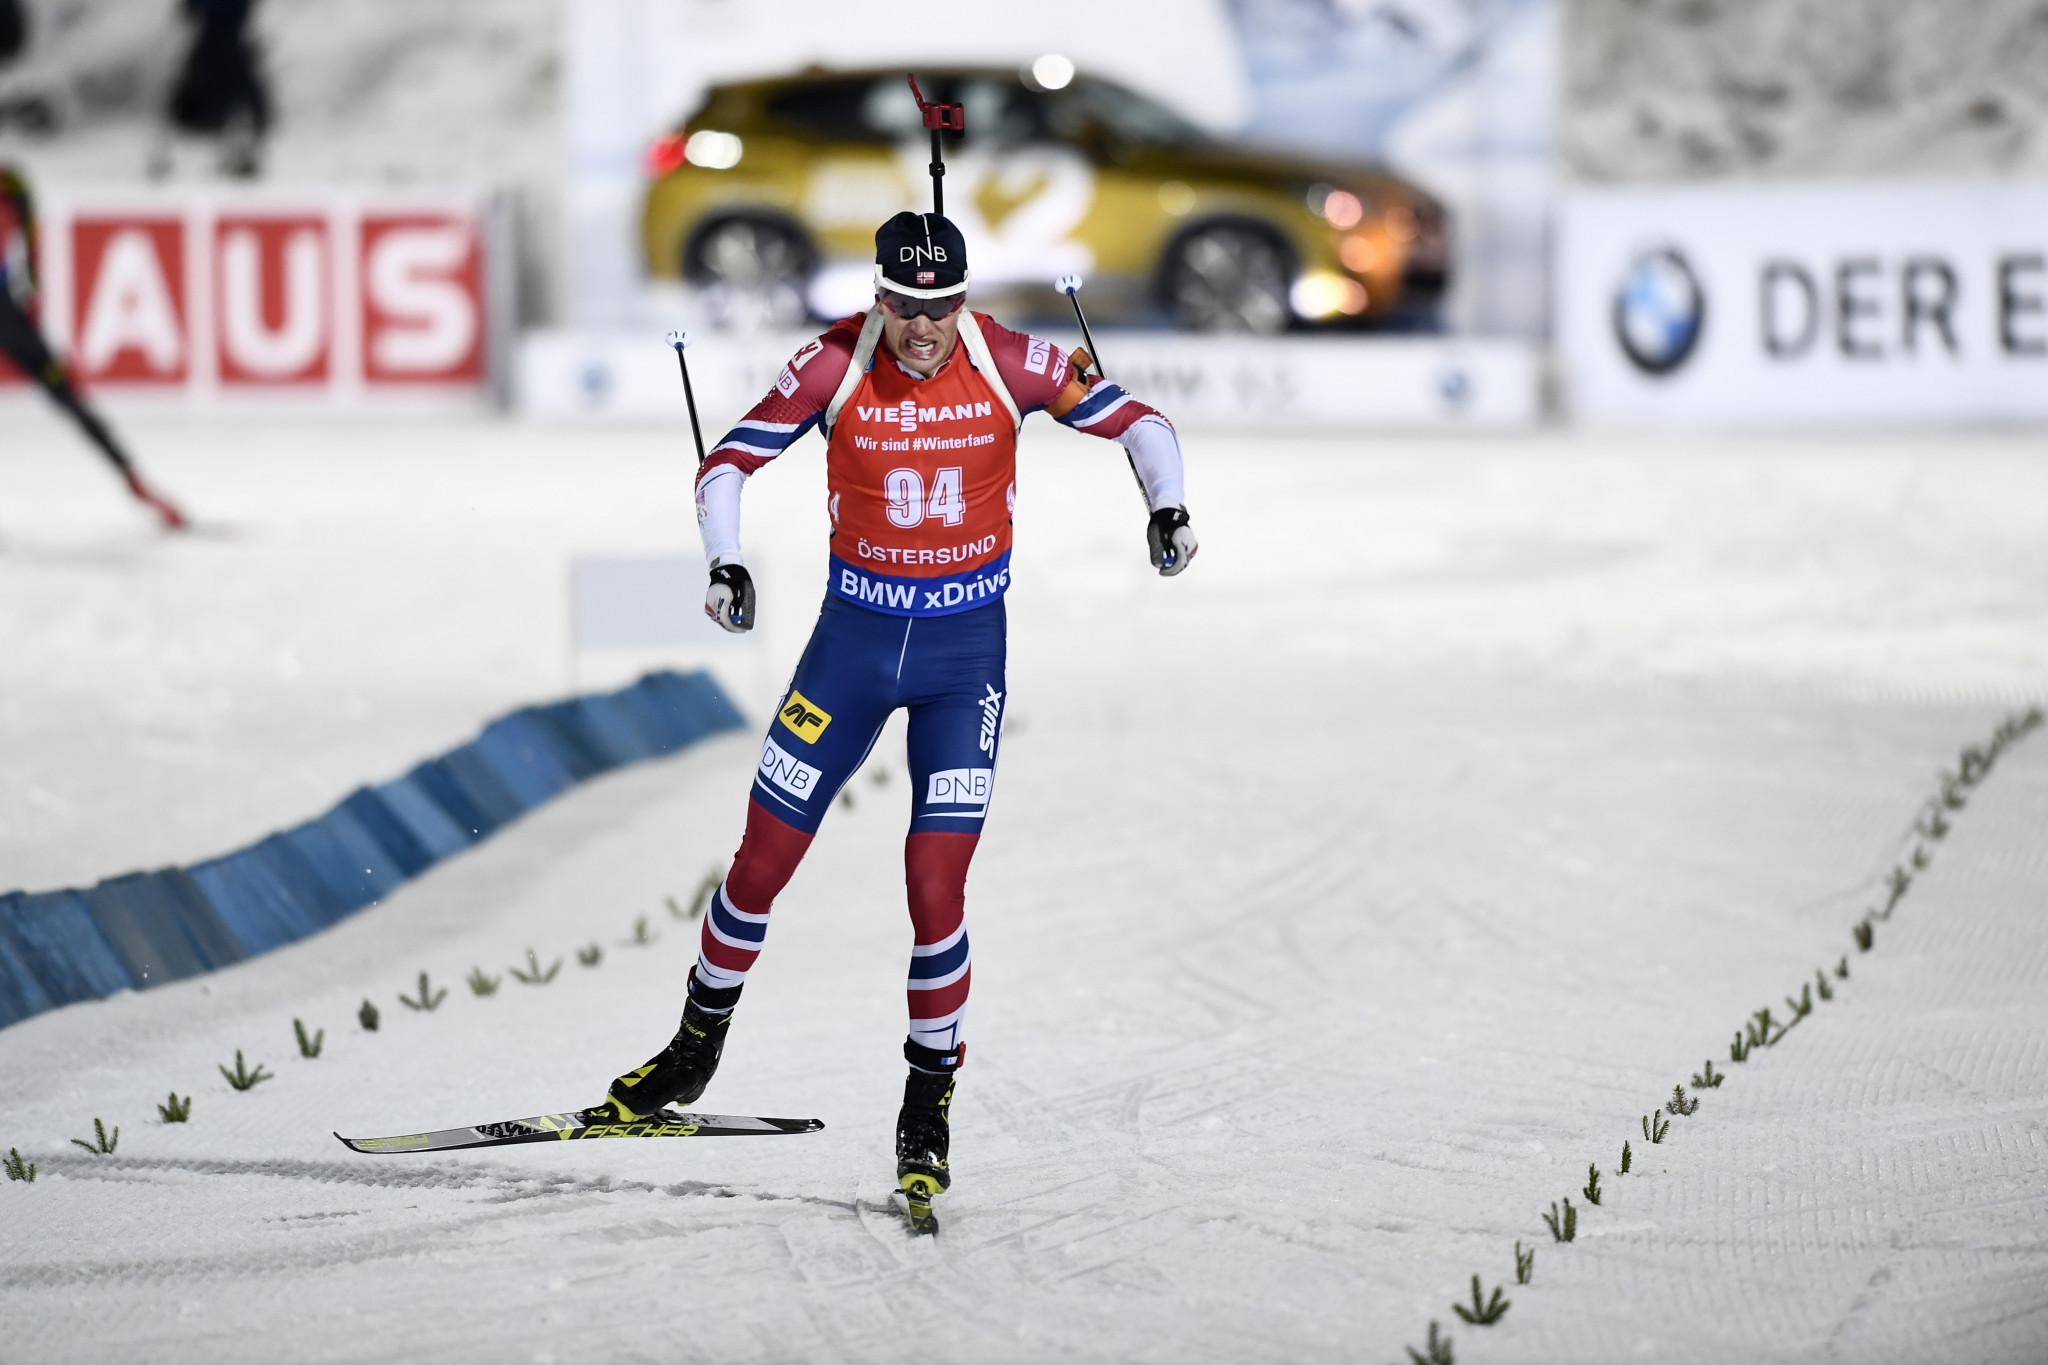 Norway's Tarjei Bø beat Frenchman Martin Fourcade in a sprint finish to secure his first victory in four years ©Getty Images